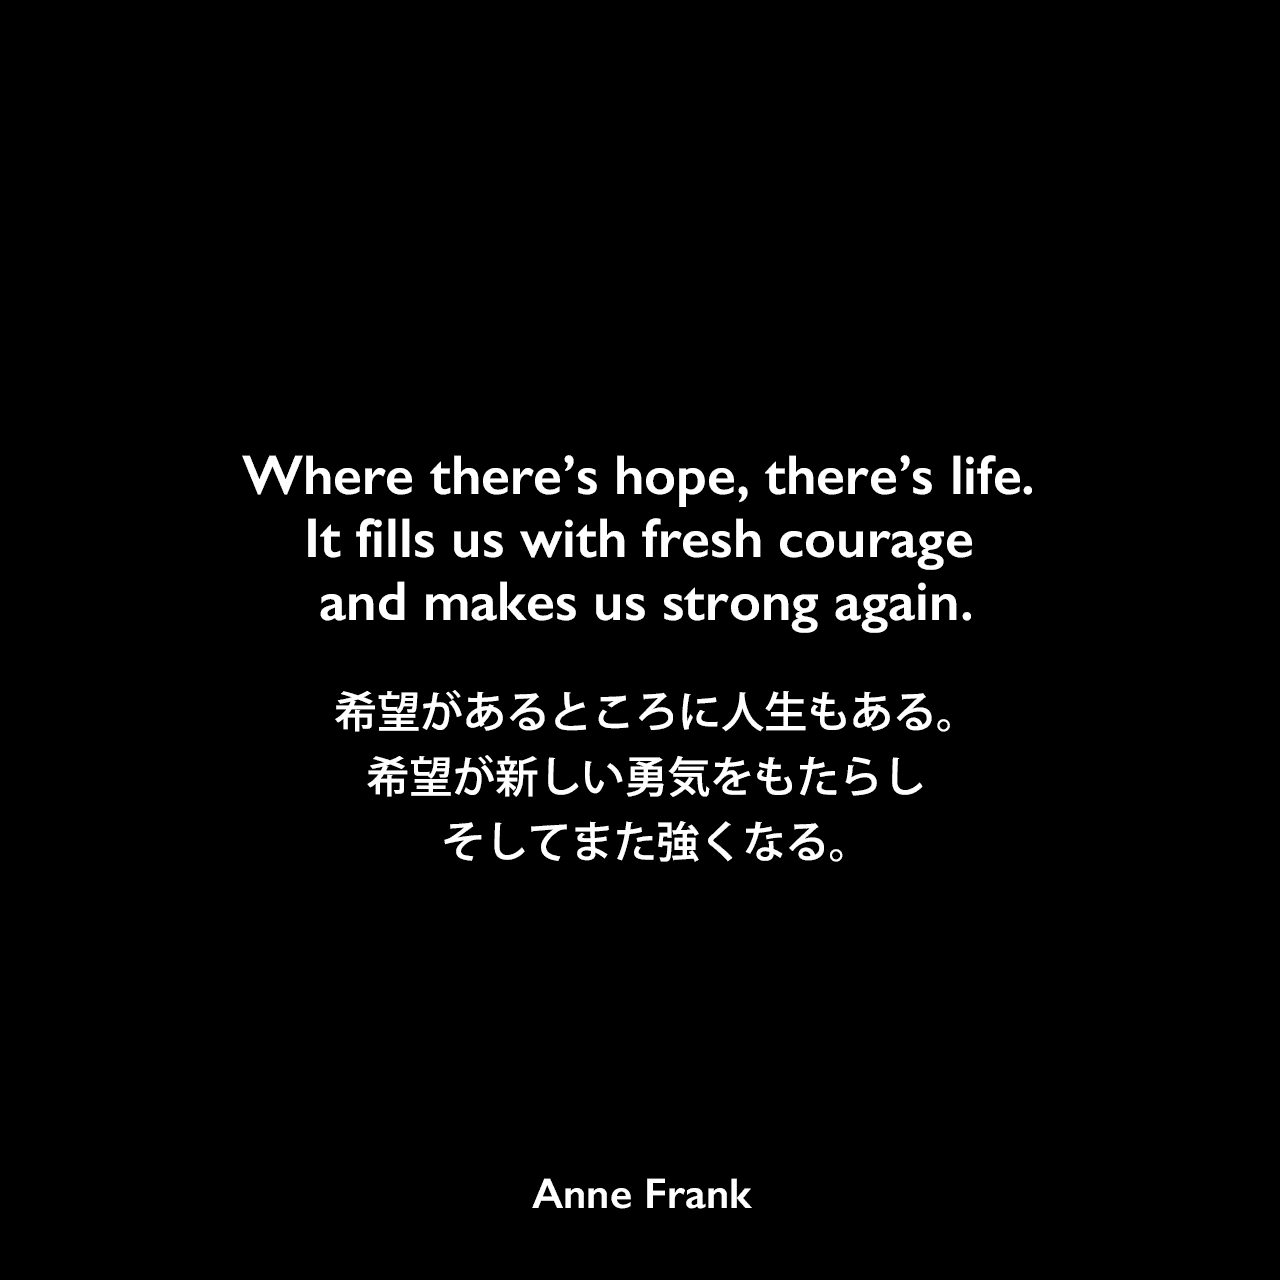 Where there’s hope, there’s life. It fills us with fresh courage and makes us strong again.希望があるところに人生もある。希望が新しい勇気をもたらし、そしてまた強くなる。